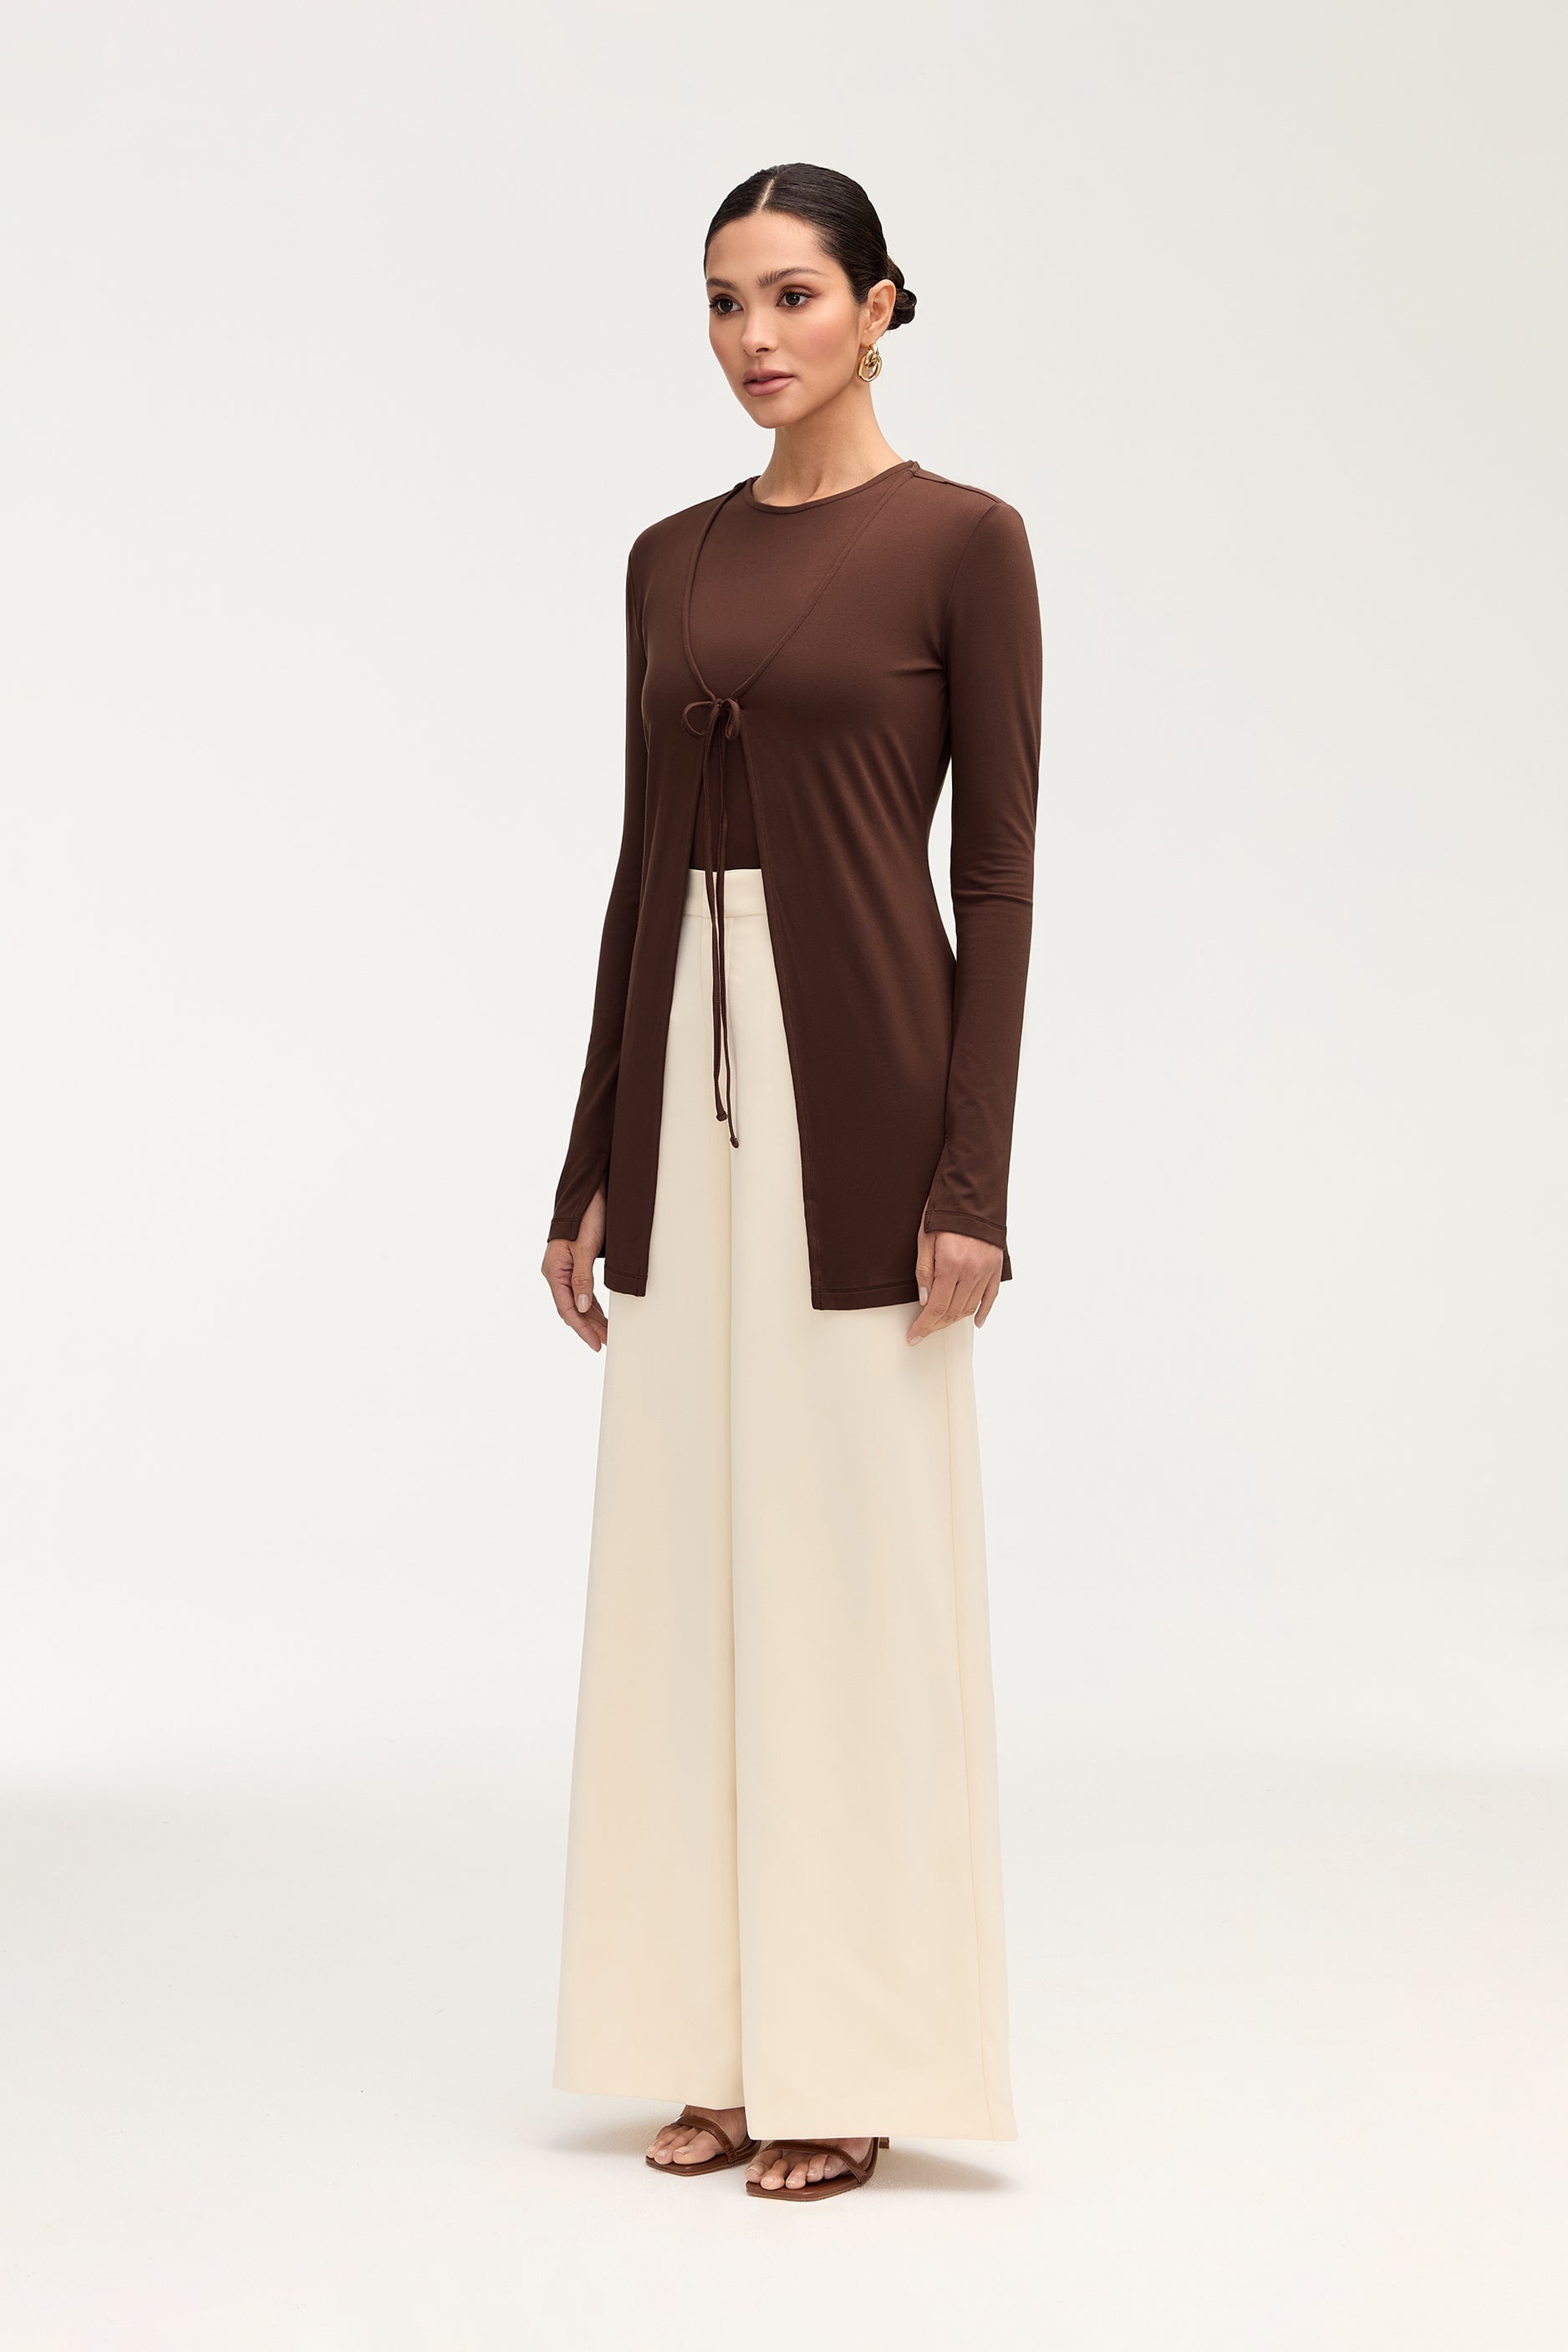 Labina Jersey Two Piece Tie Front Top - Brown Clothing Veiled 